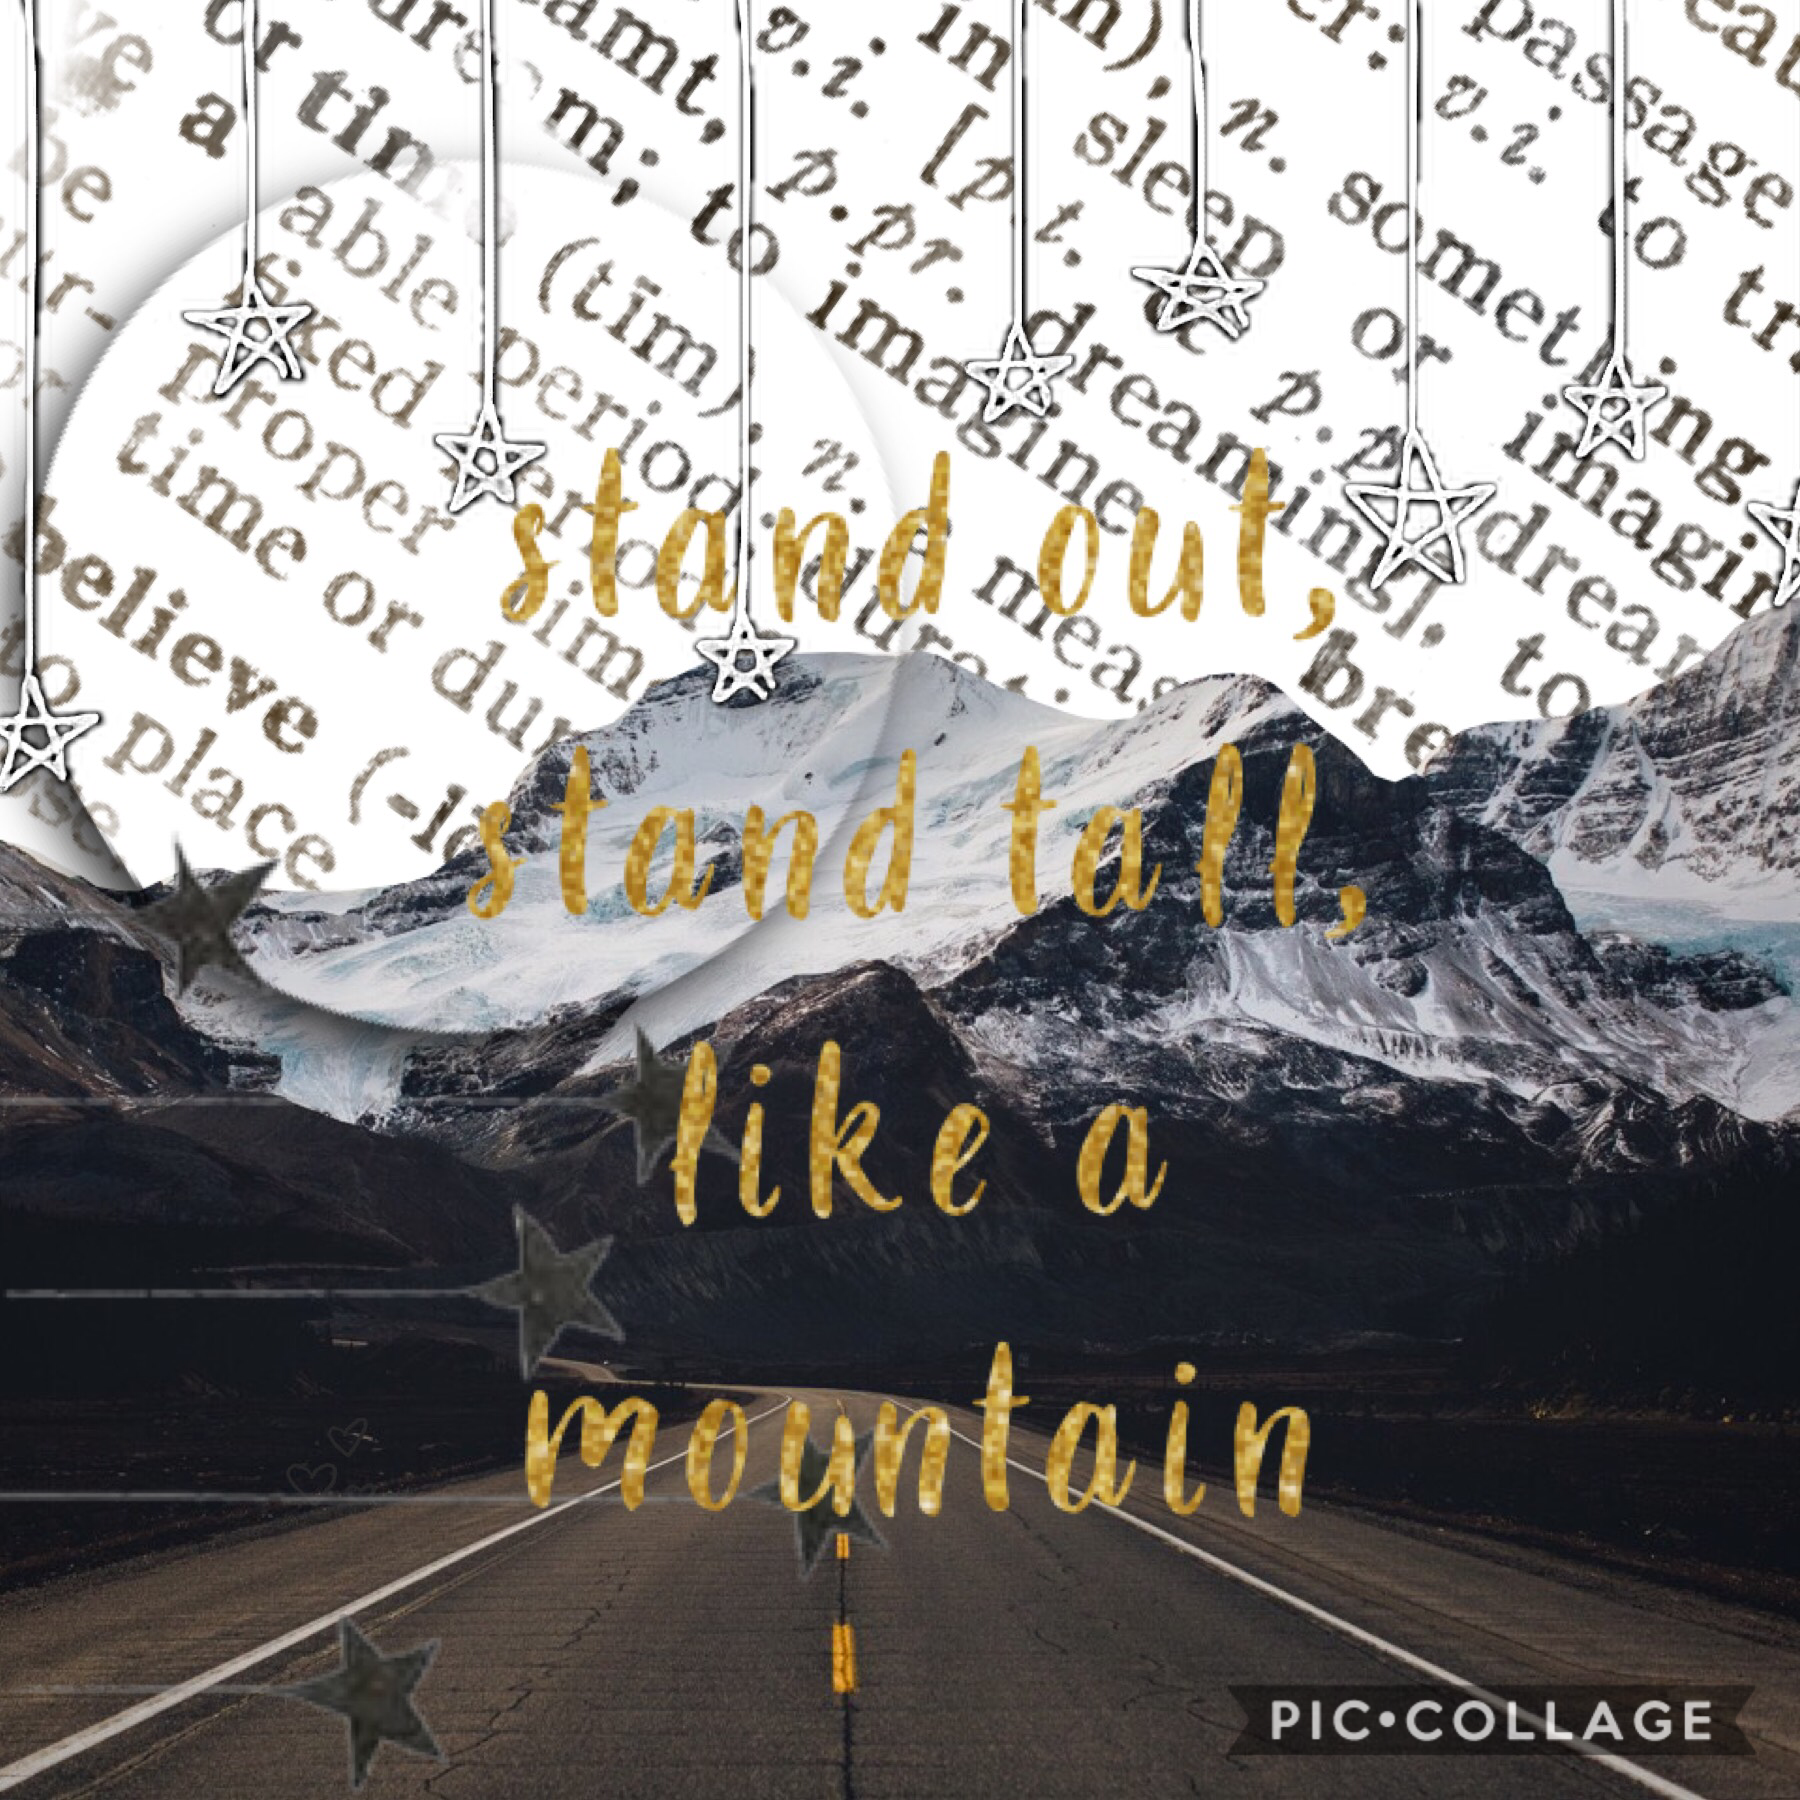 Be like a Mountain 
Tappy
08.10.19